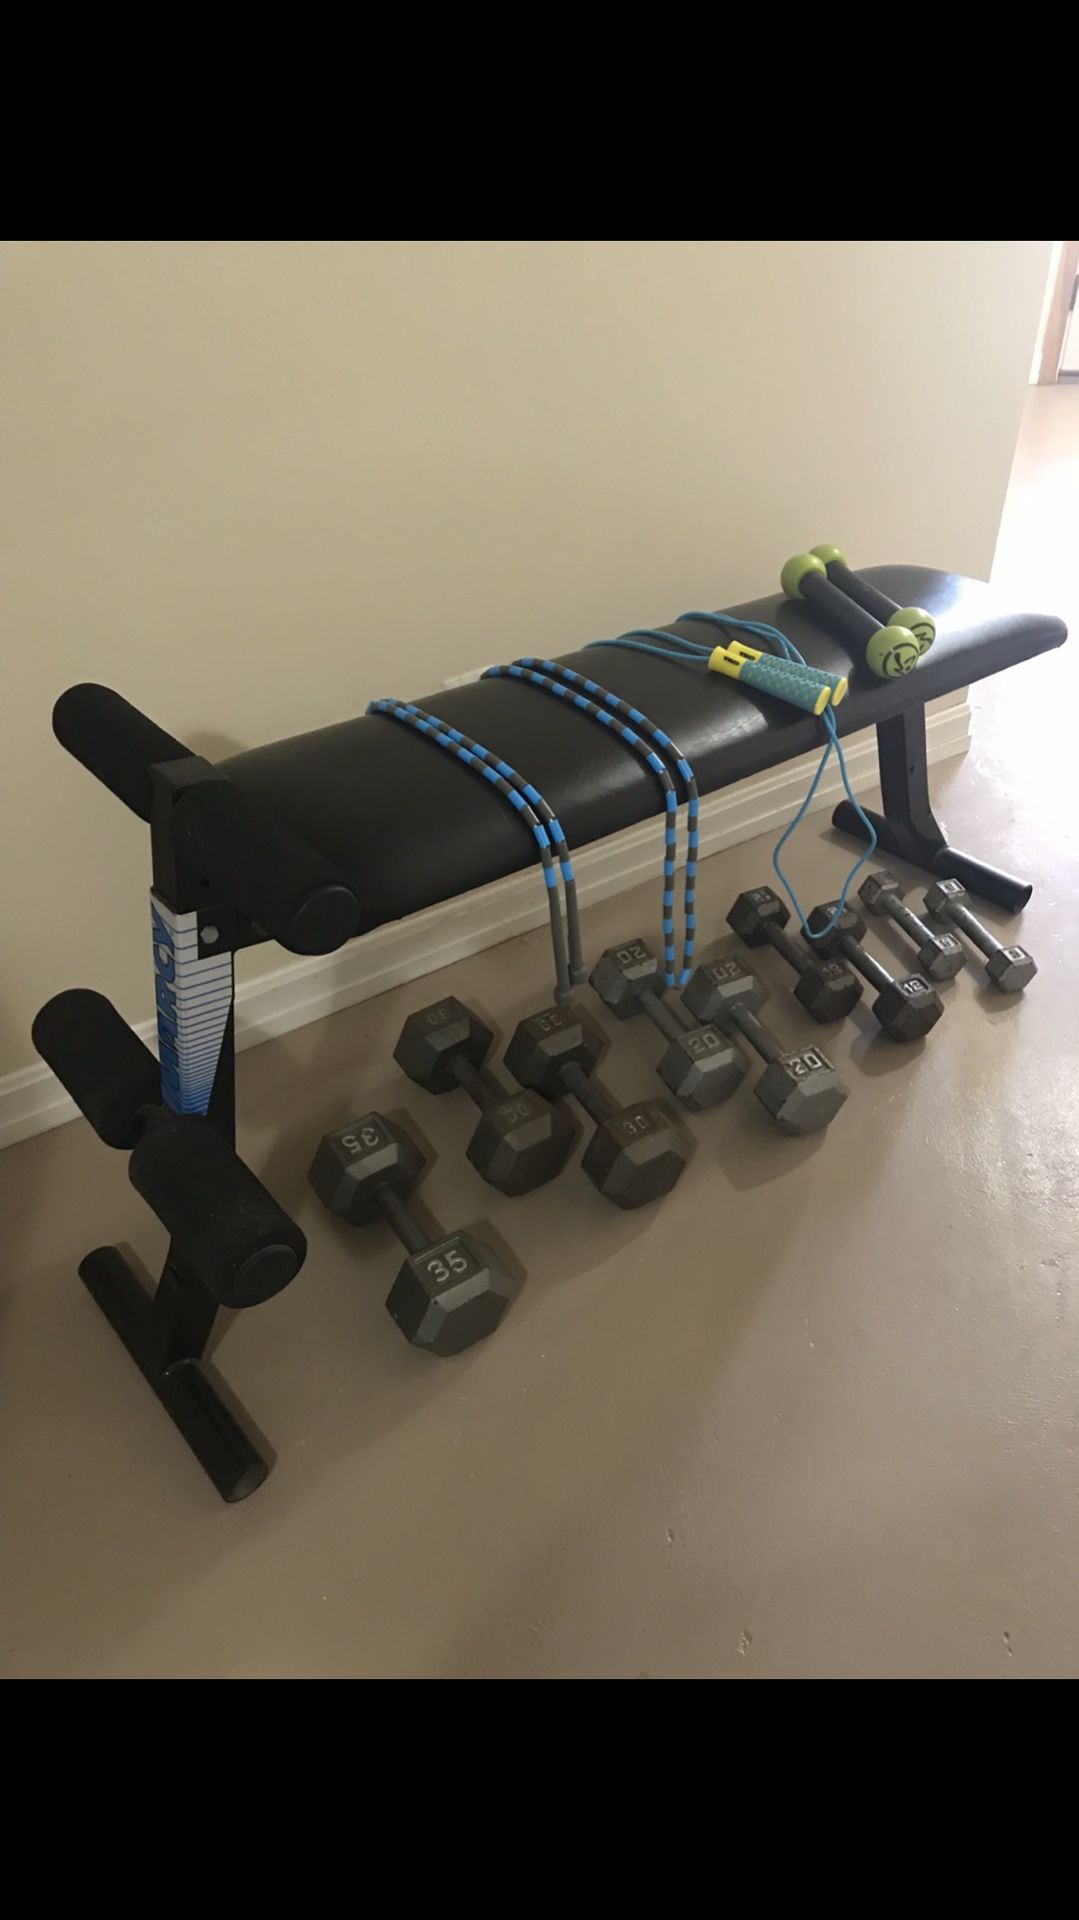 Work out bench and weights